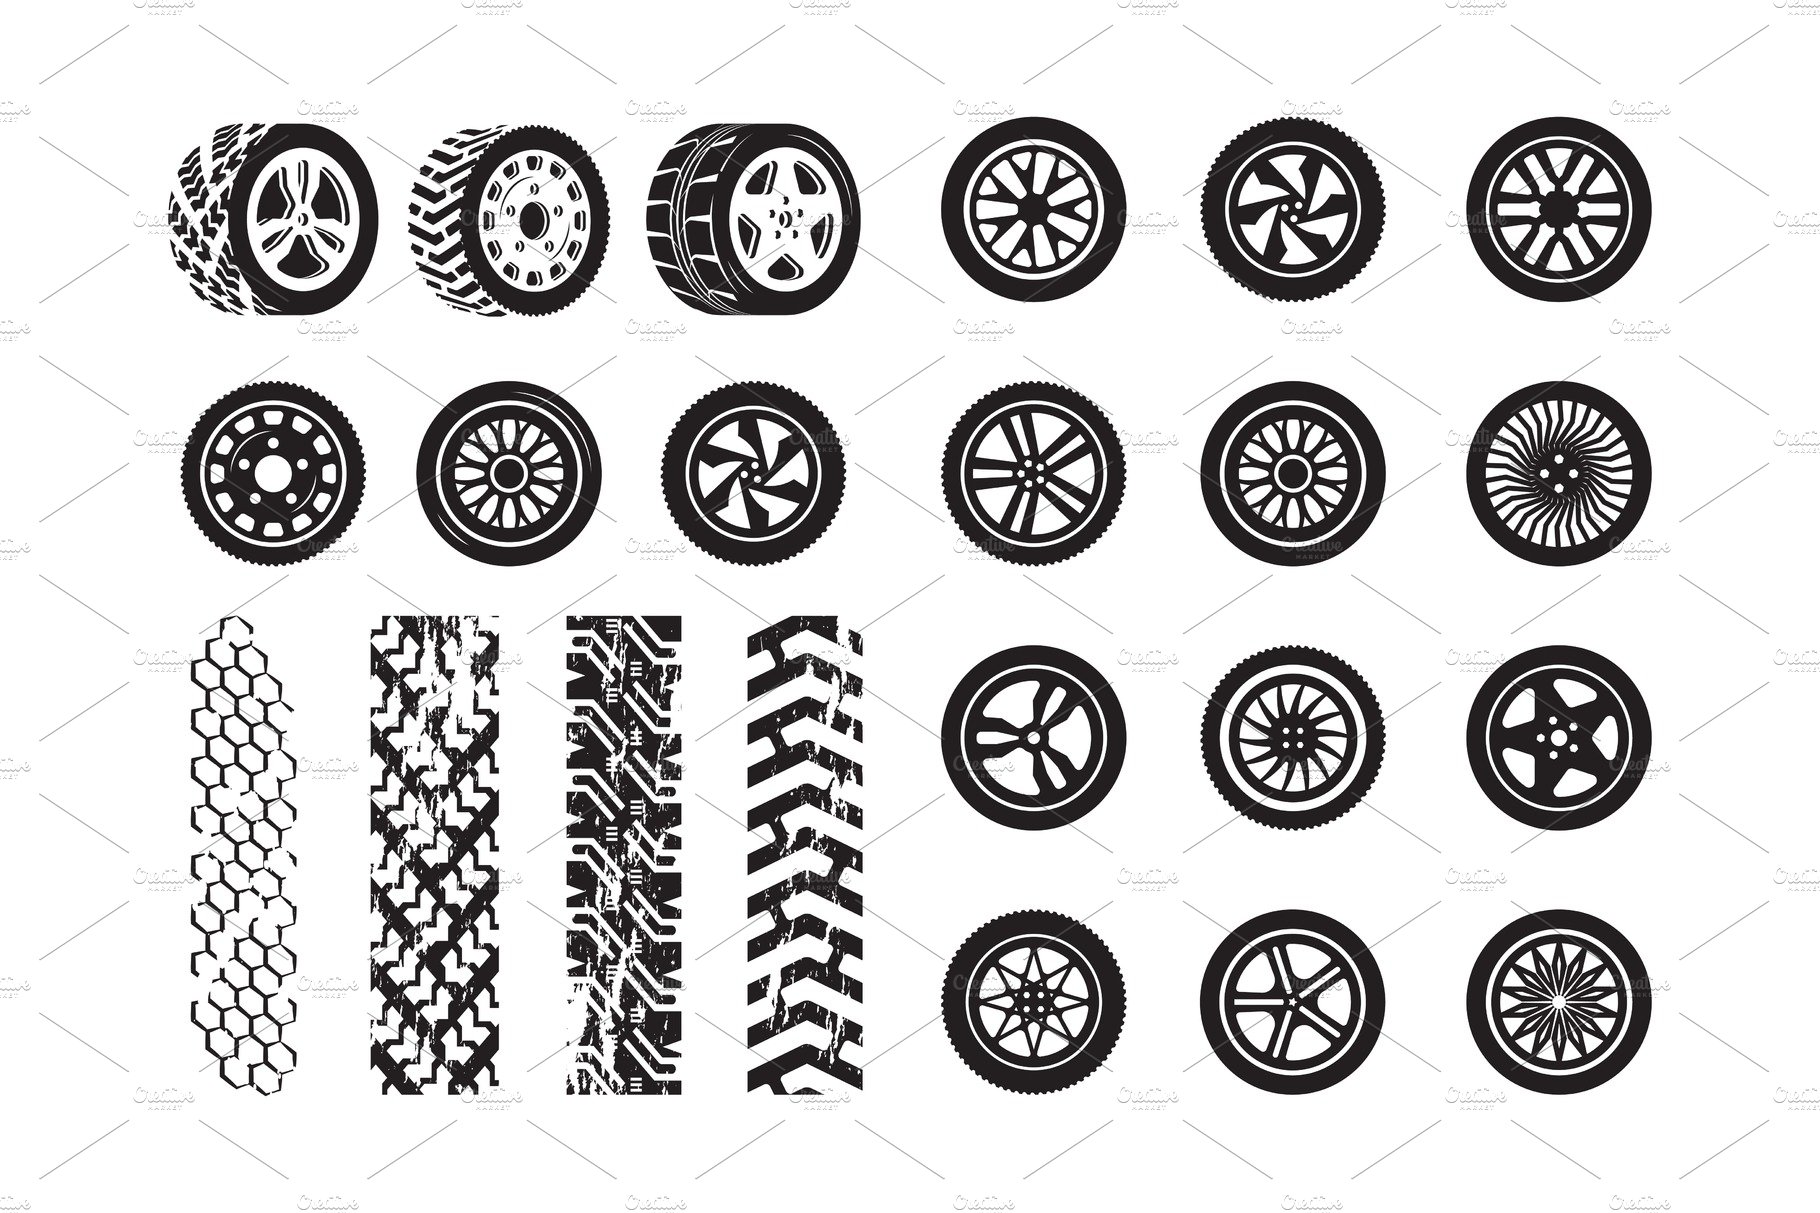 Tire texture. Car wheel rubber tires cover image.